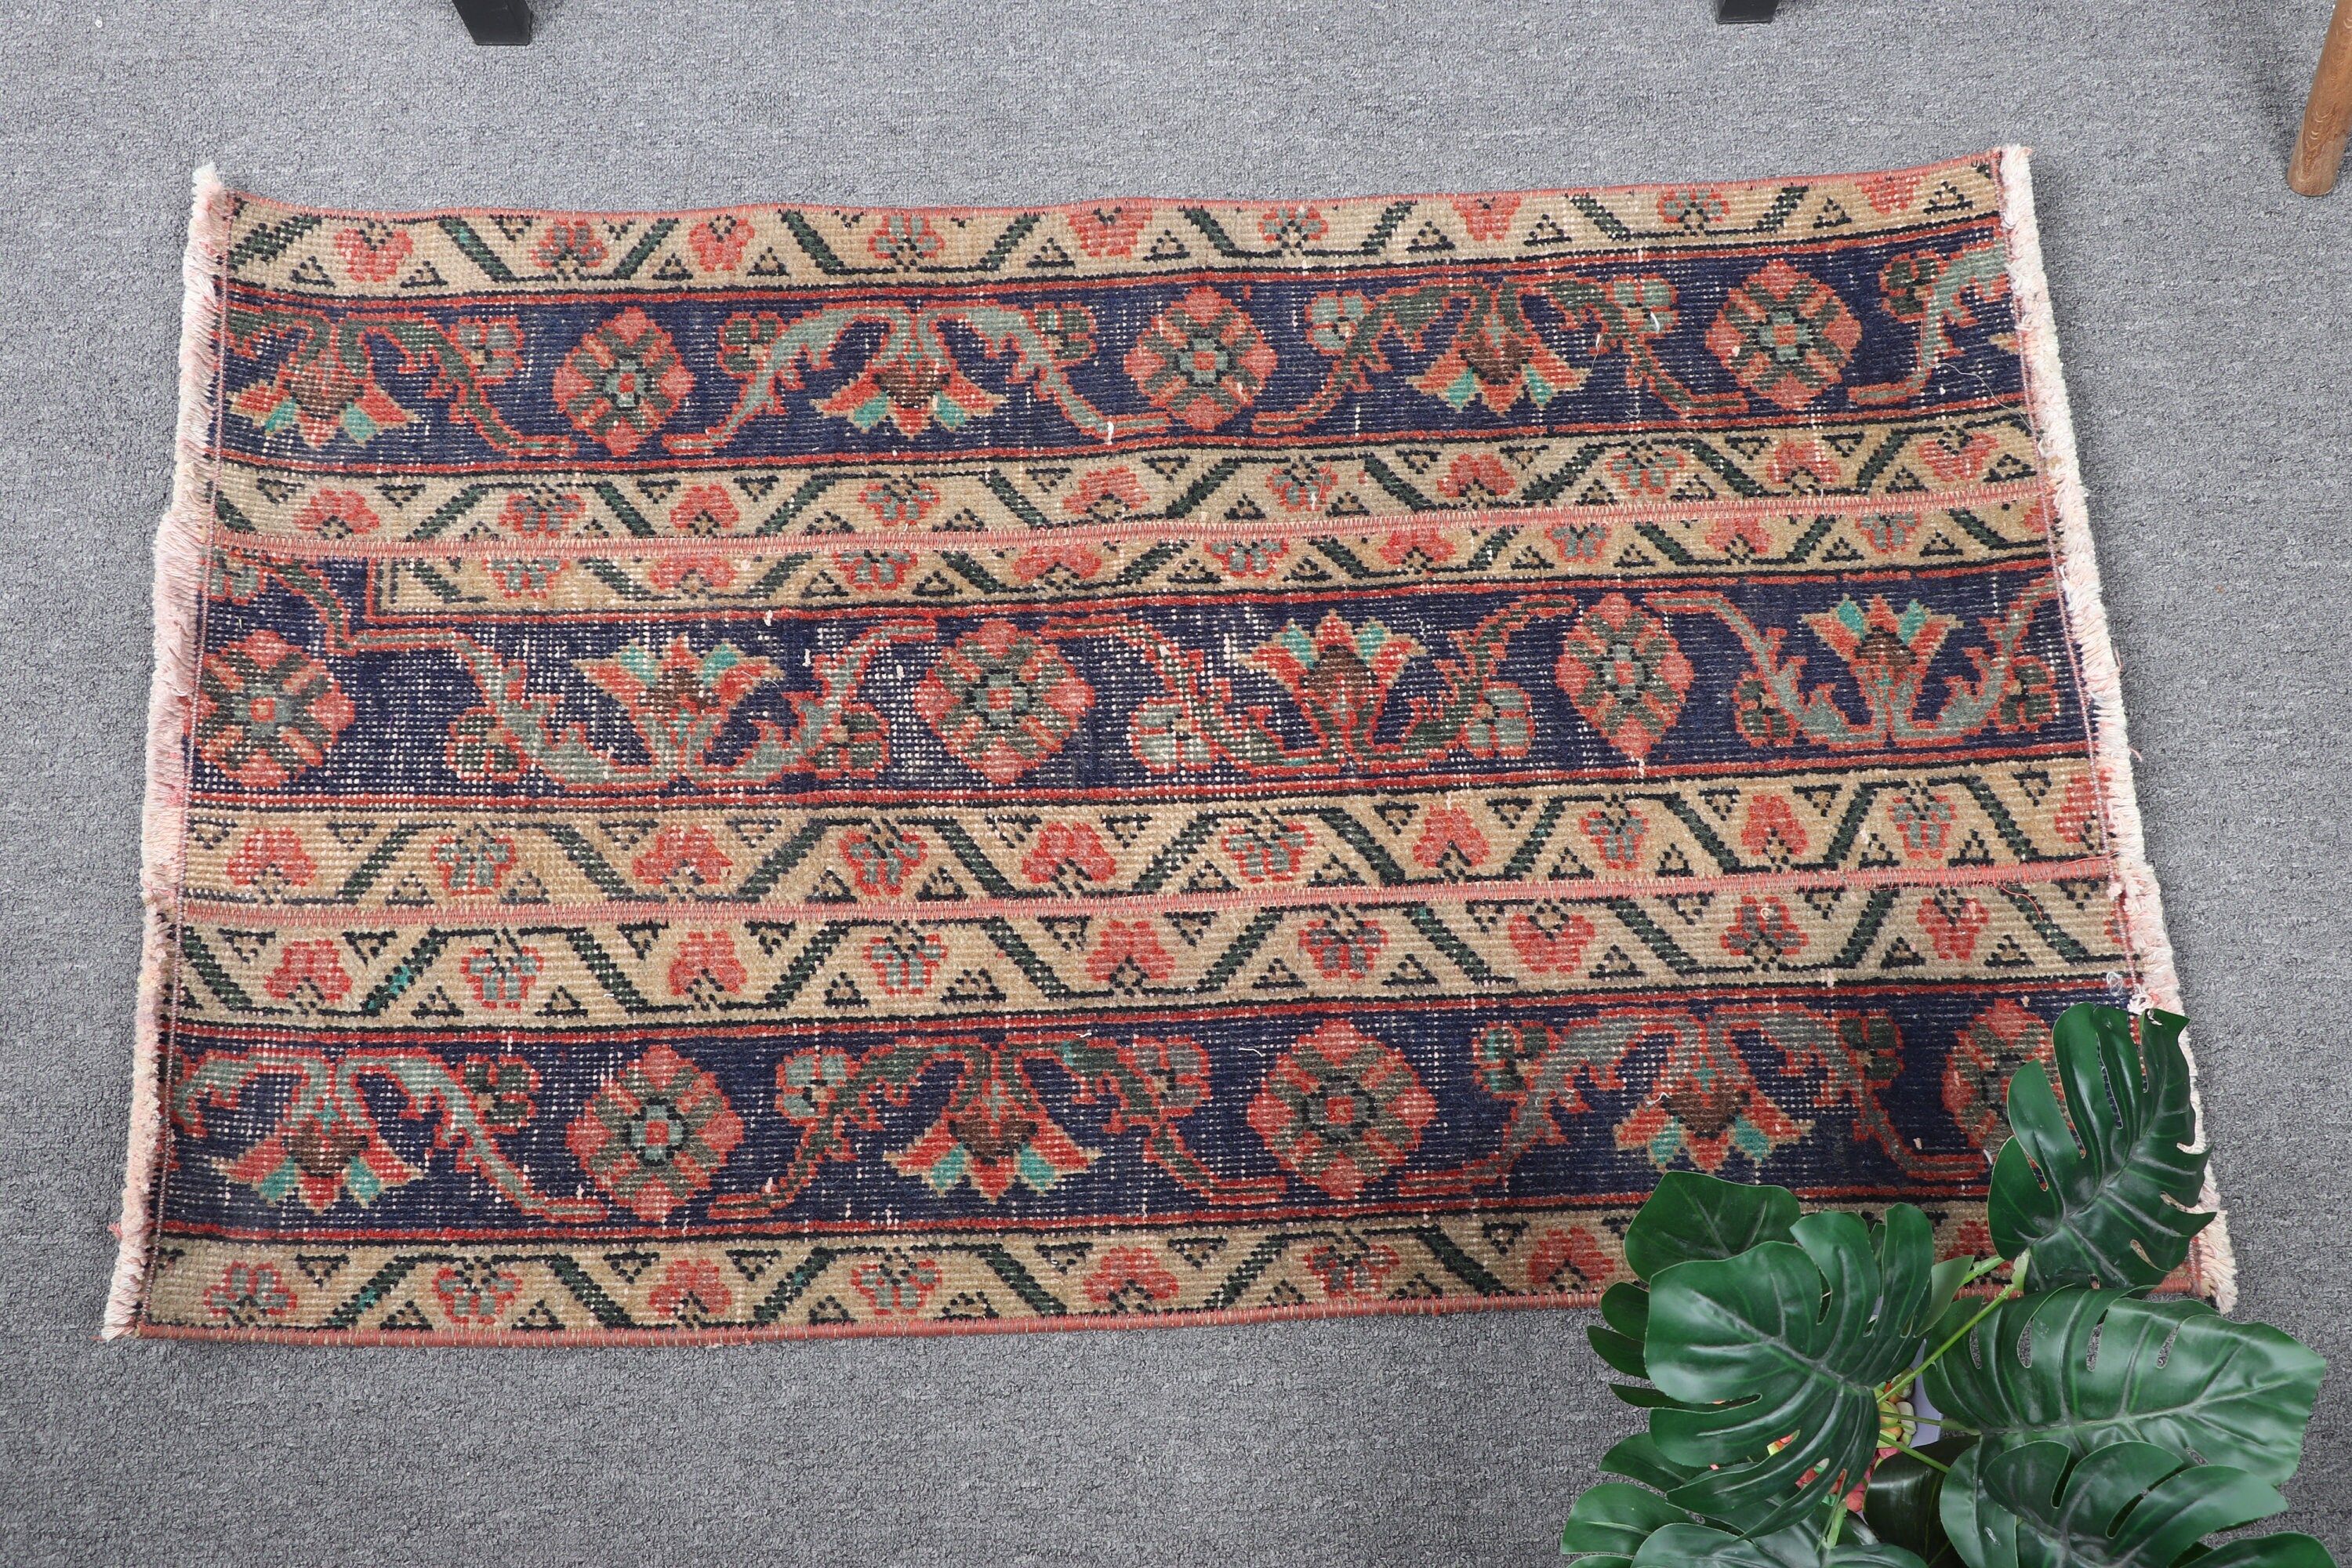 Blue Wool Rugs, Rugs for Kitchen, Door Mat Rug, Vintage Rug, Antique Rugs, 1.9x3.1 ft Small Rug, Turkish Rugs, Kitchen Rug